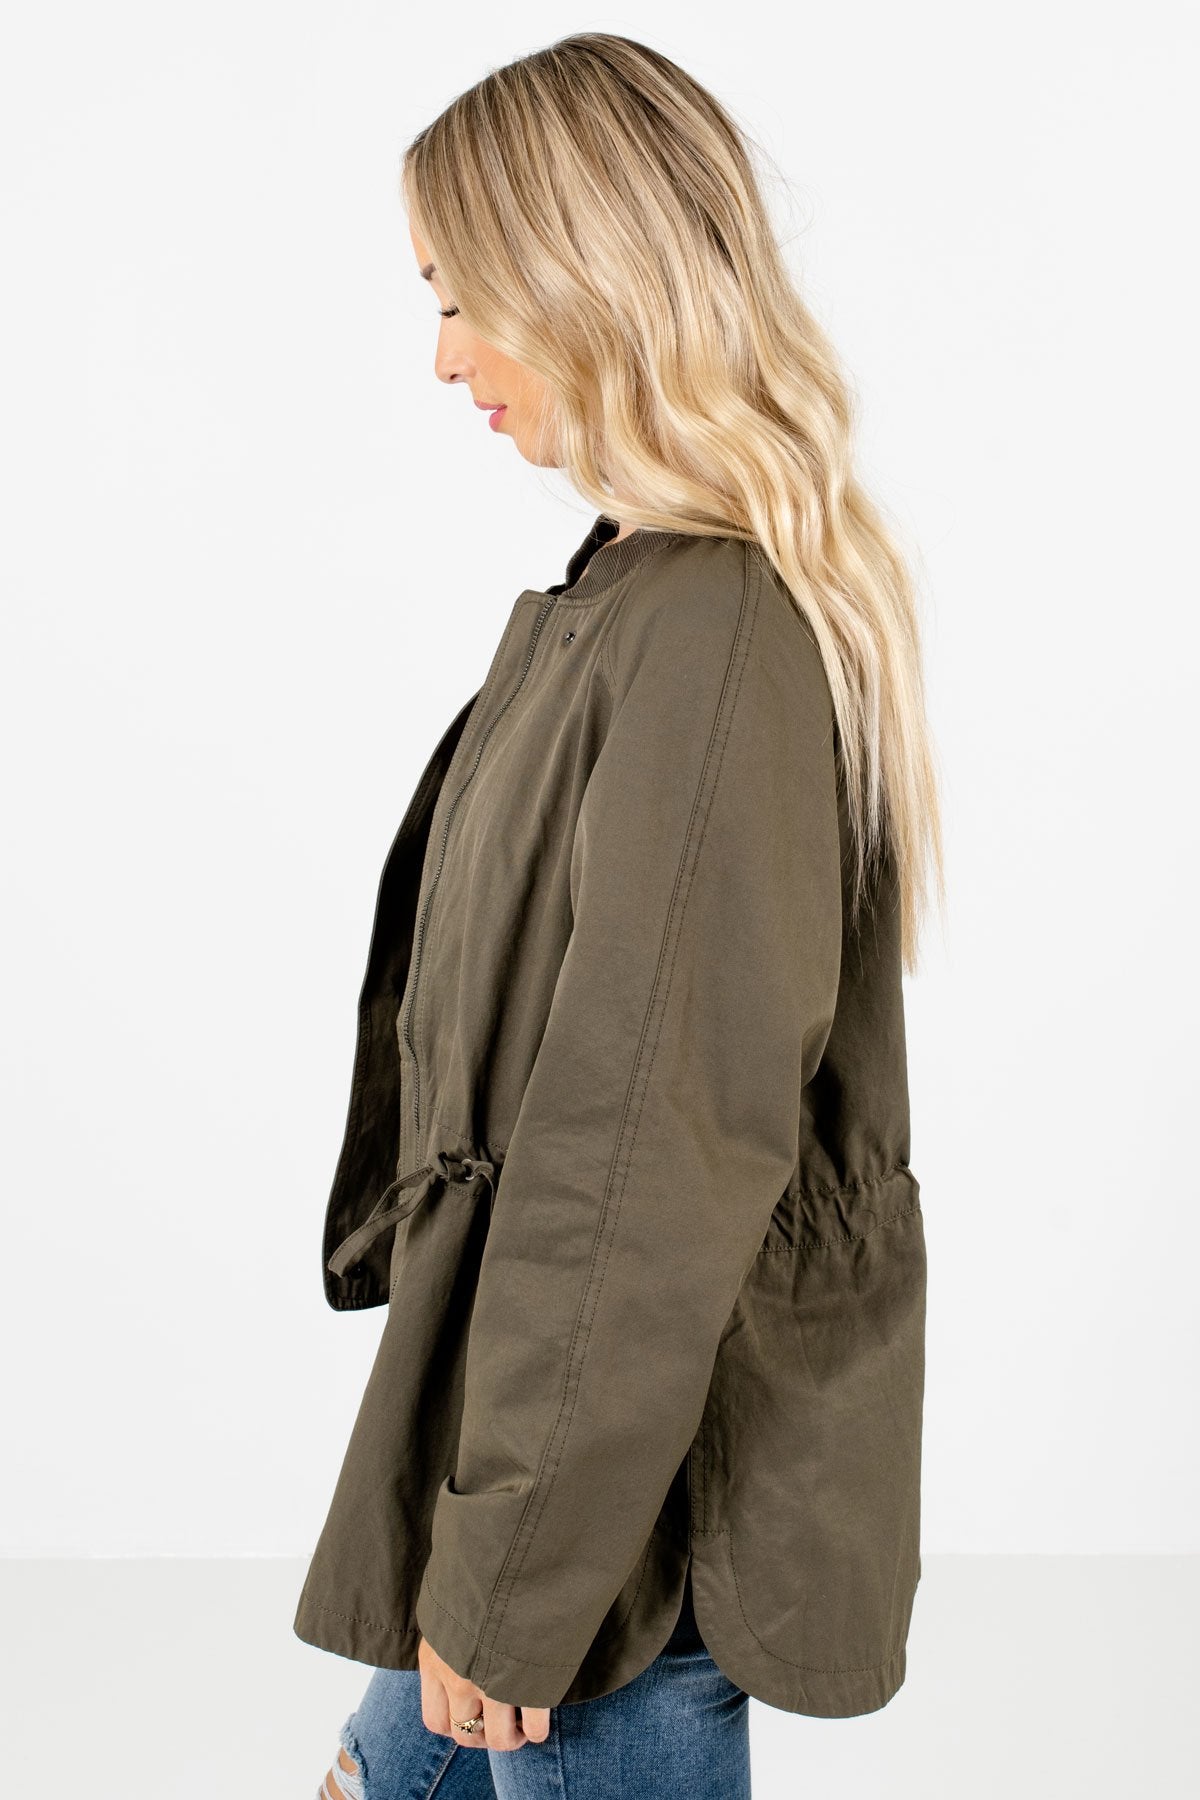 Olive Green Fully Lined Boutique Jackets for Women